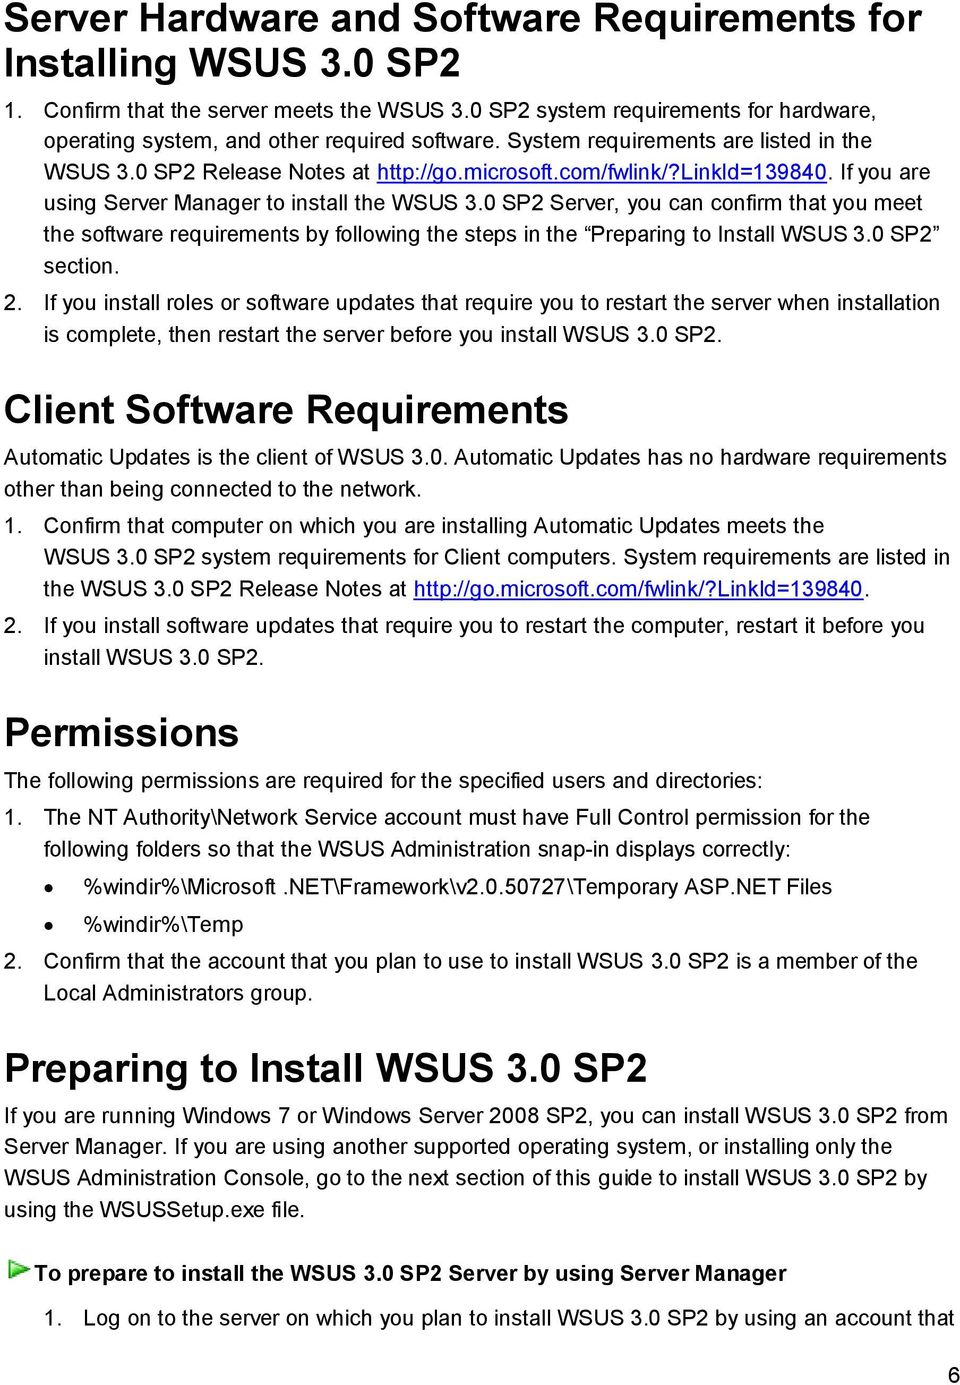 0 SP2 Server, you can confirm that you meet the software requirements by following the steps in the Preparing to Install WSUS 3.0 SP2 section. 2.